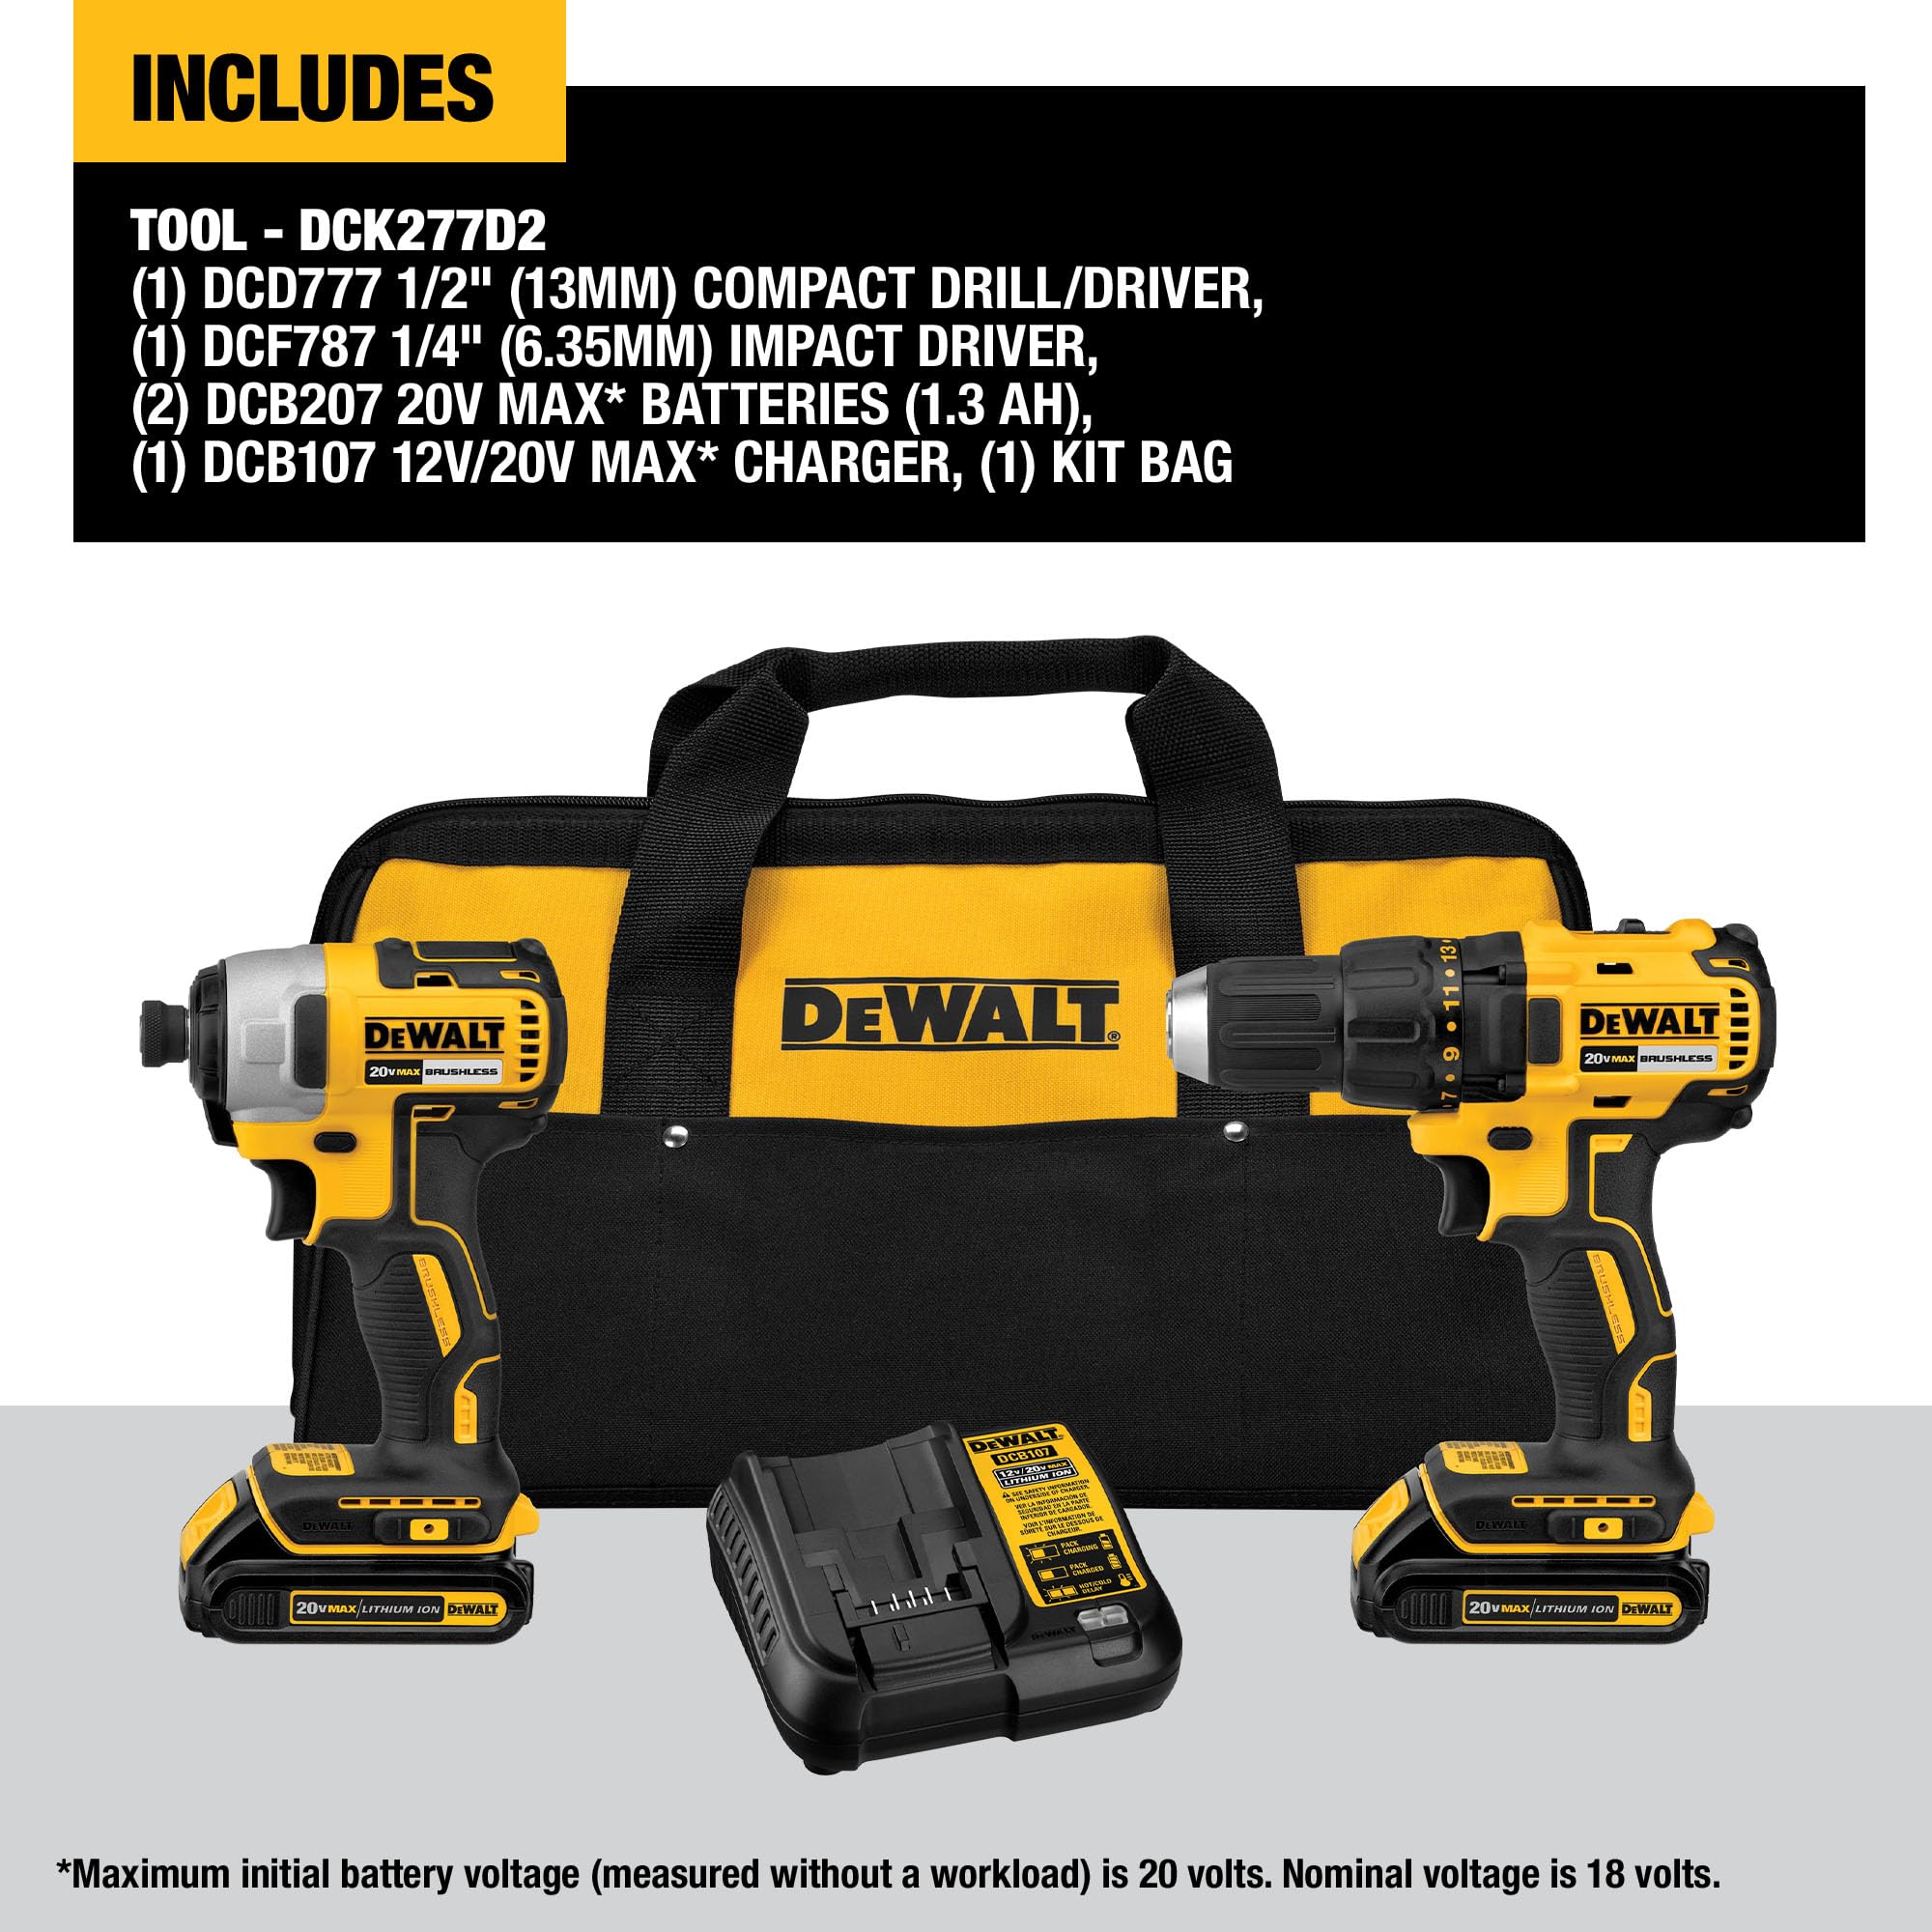 DEWALT 20V MAX Power Tool Combo Kit, Cordless Power Tool Set, 2-Tool with 2 Batteries and Charger Included (DCK277D2)